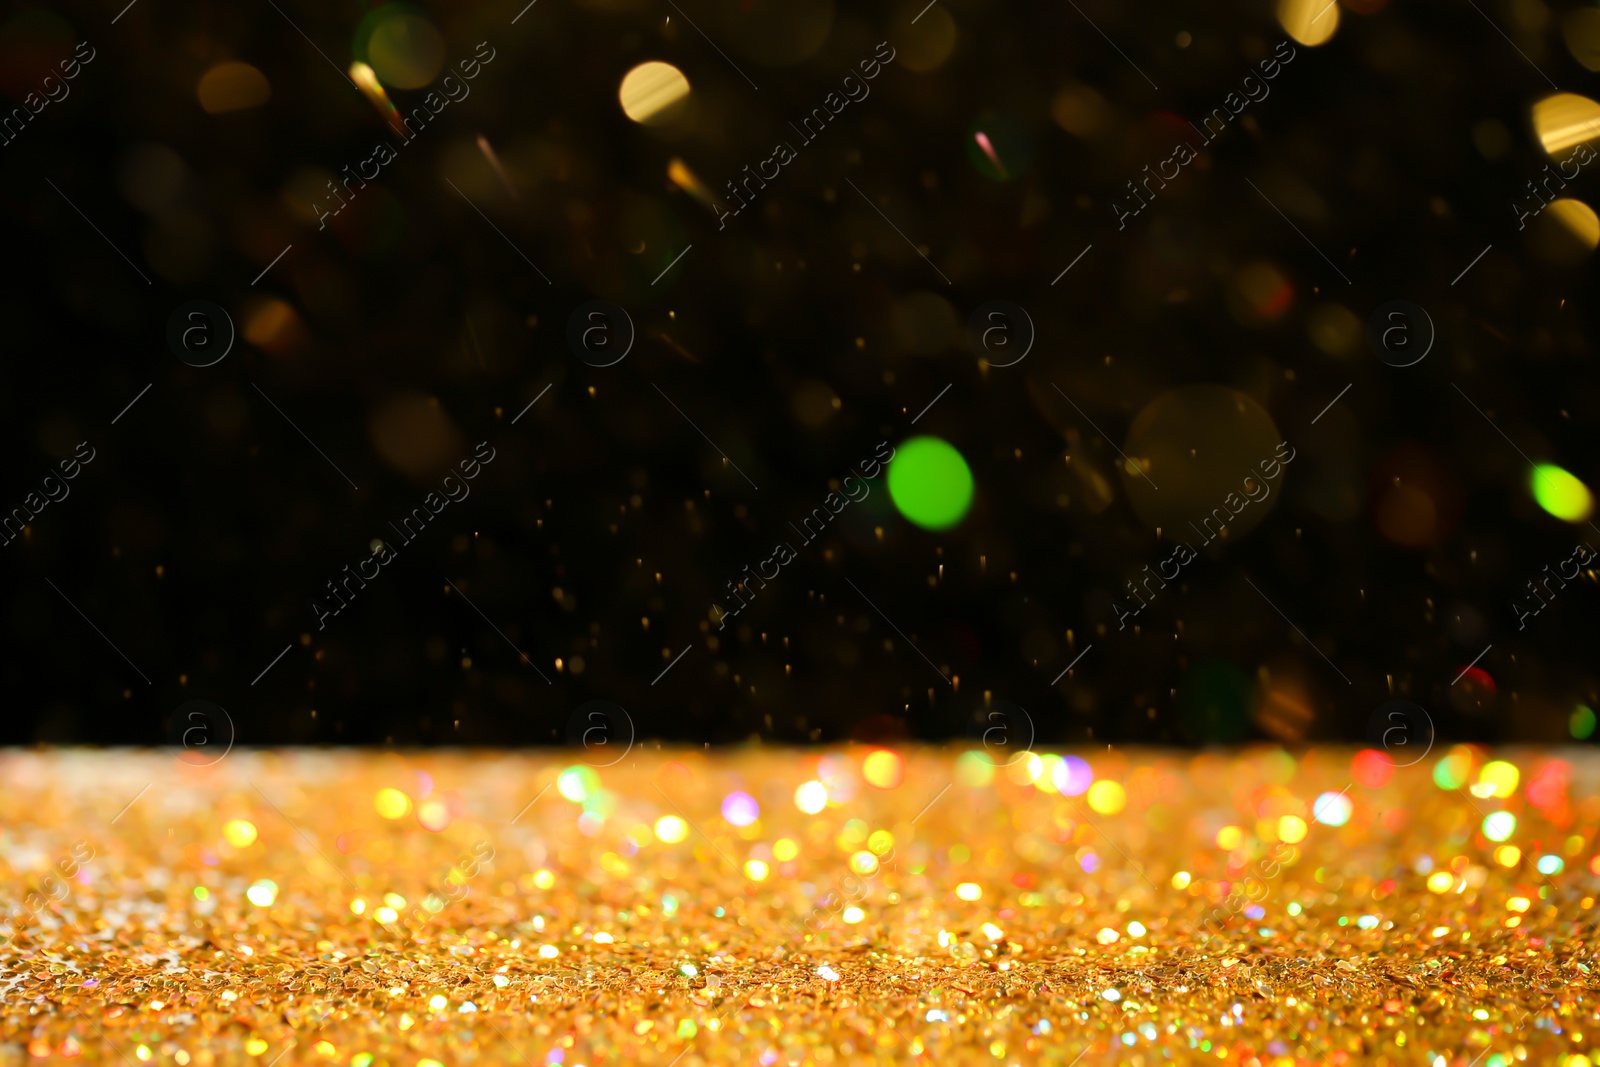 Photo of Many golden paillettes against black background. Space for text